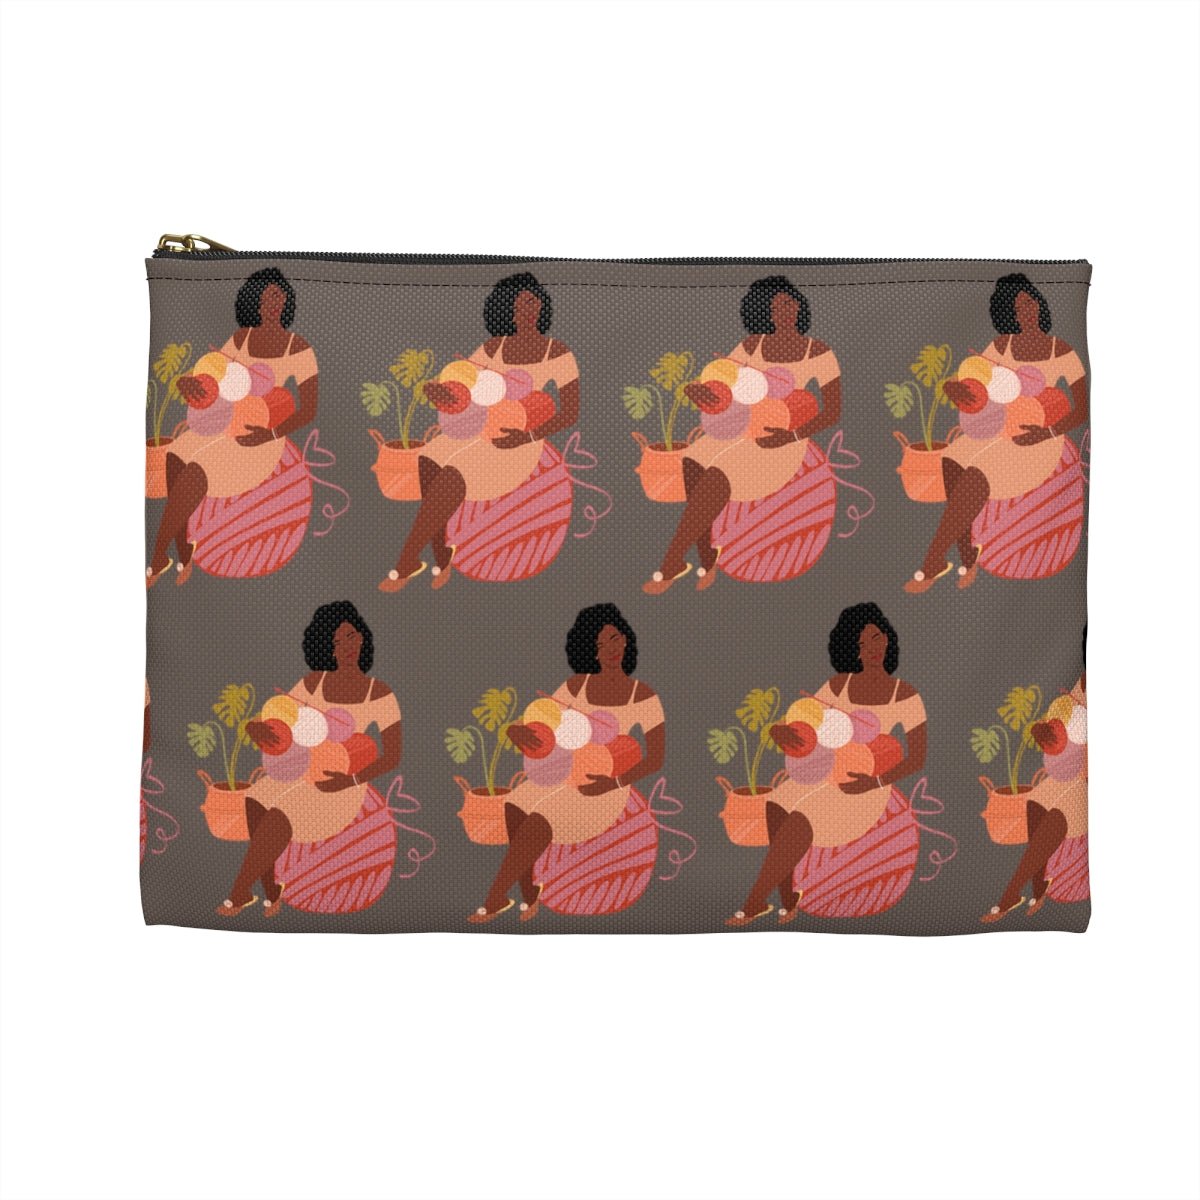 Crochet Lady Pouch - The Trini Gee